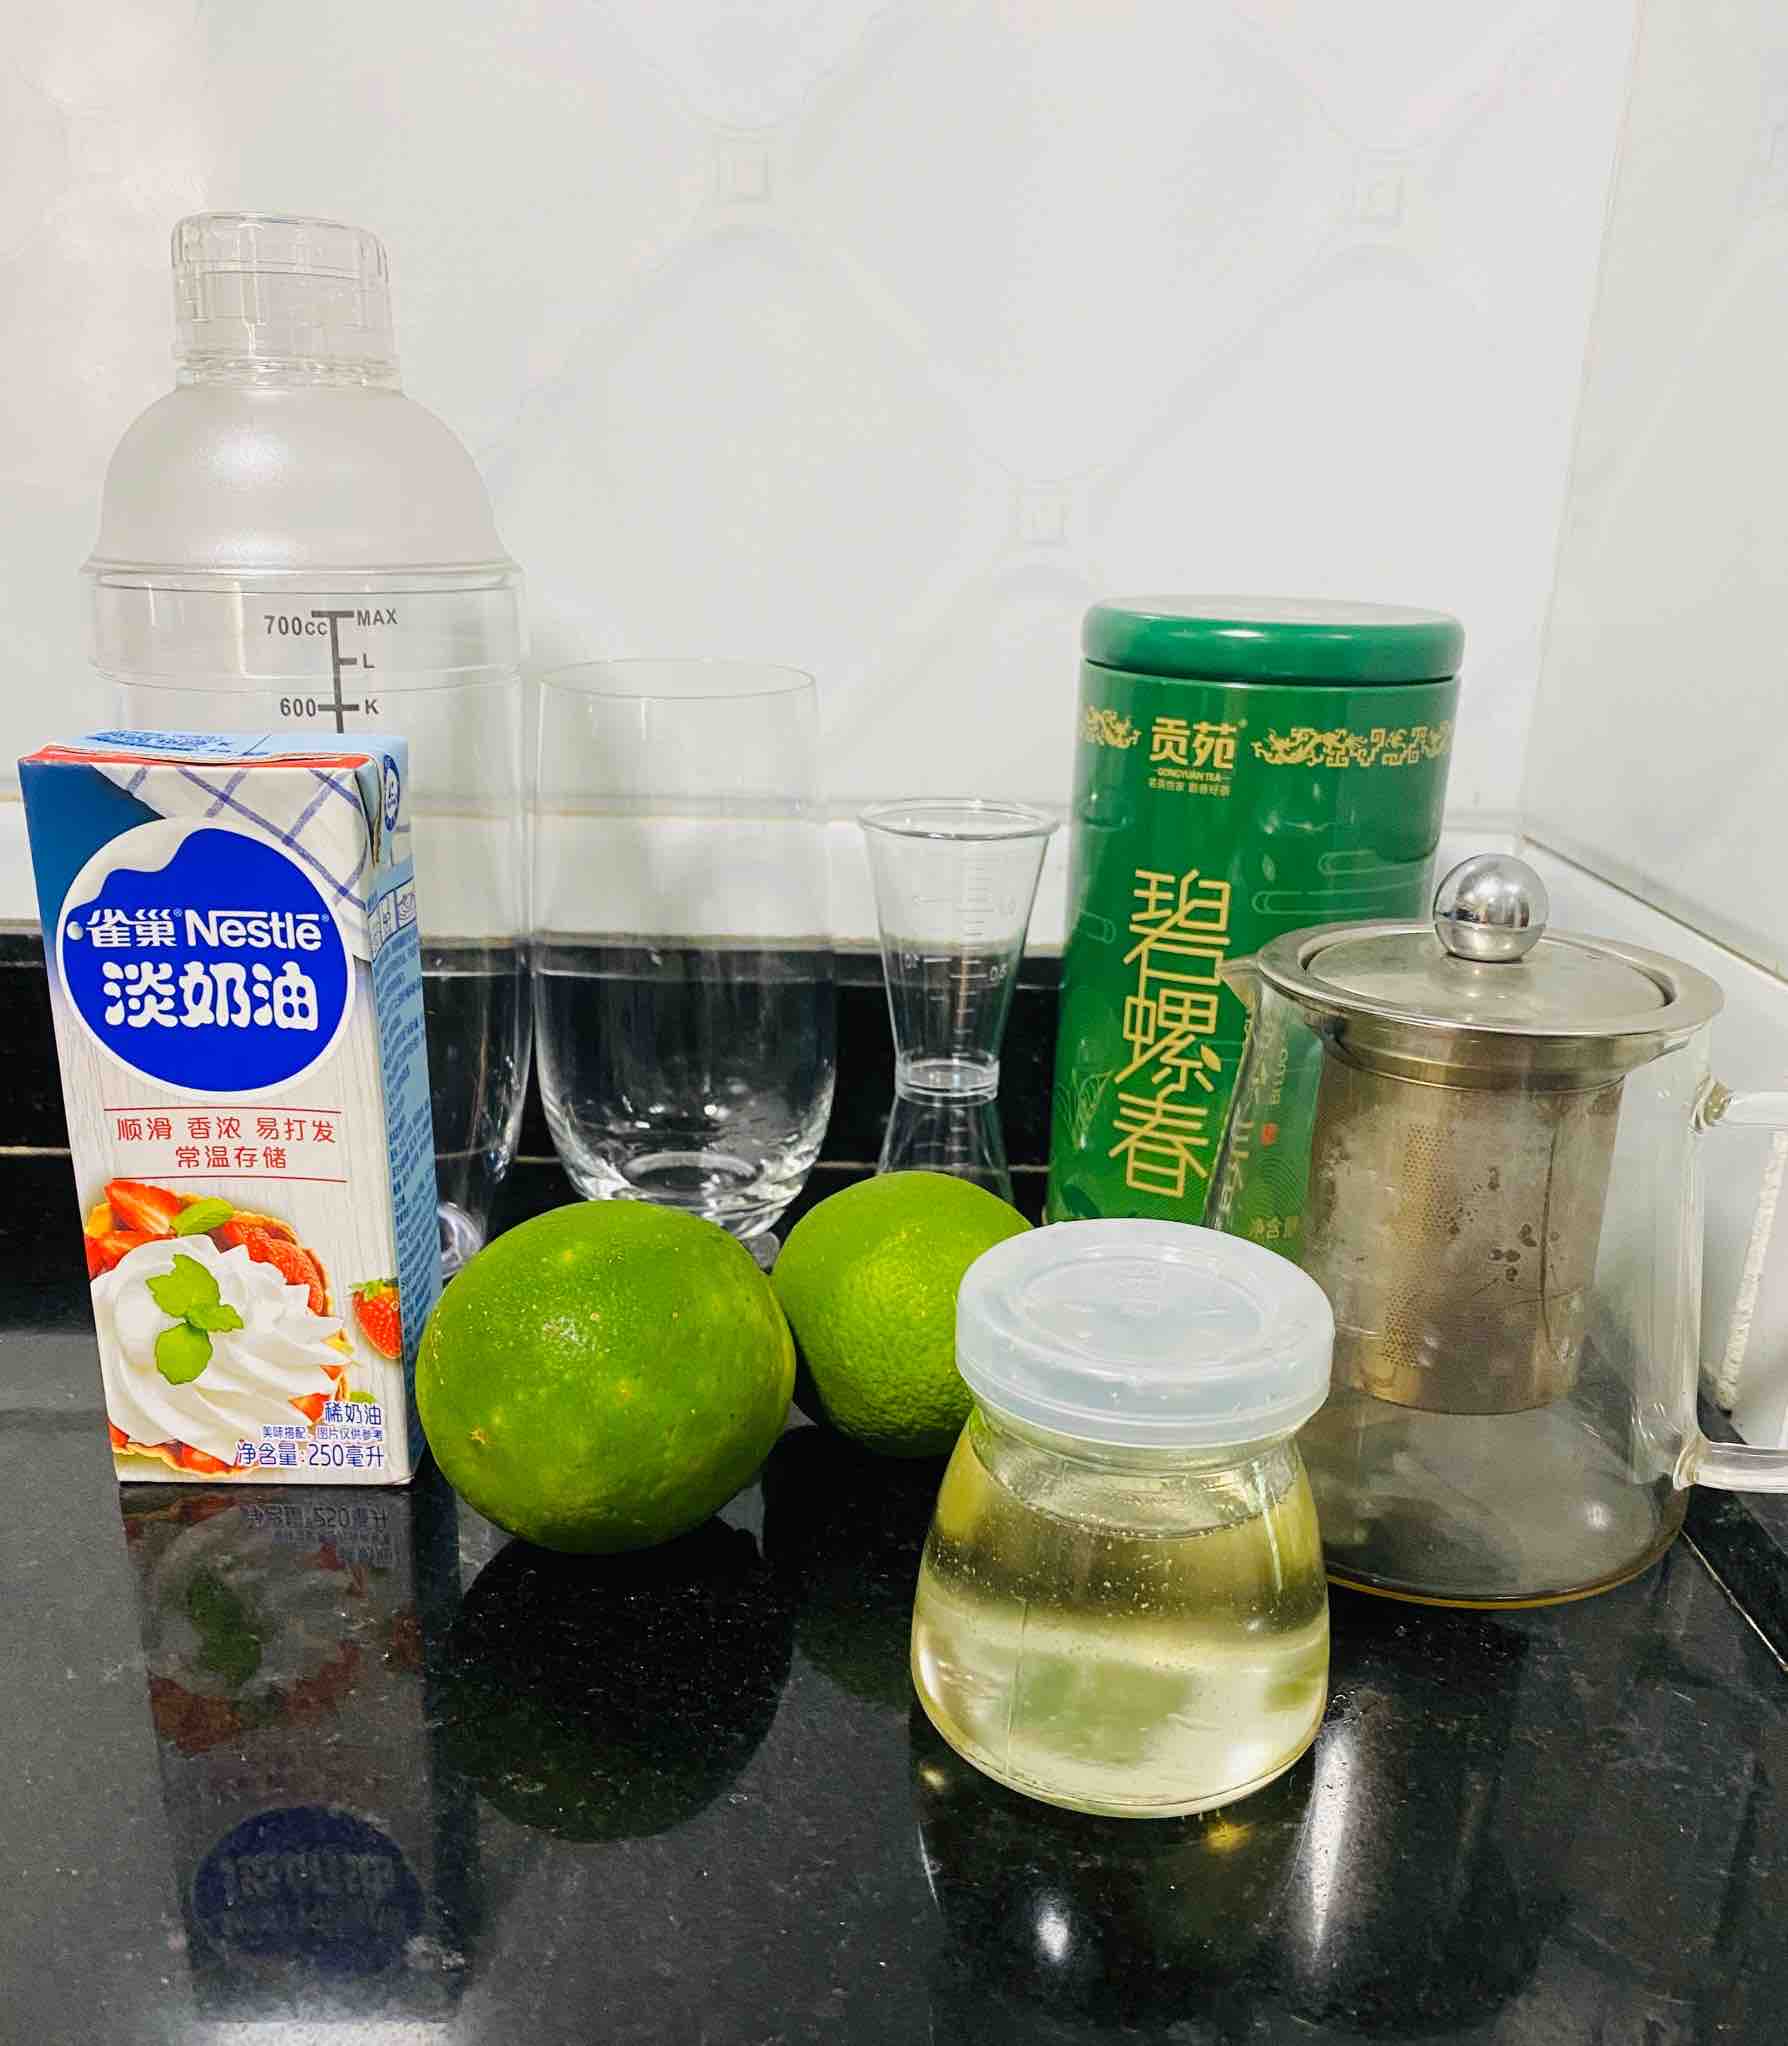 Special Drink for Dog Days, Cheese Milk Covered Lemon Green Tea recipe